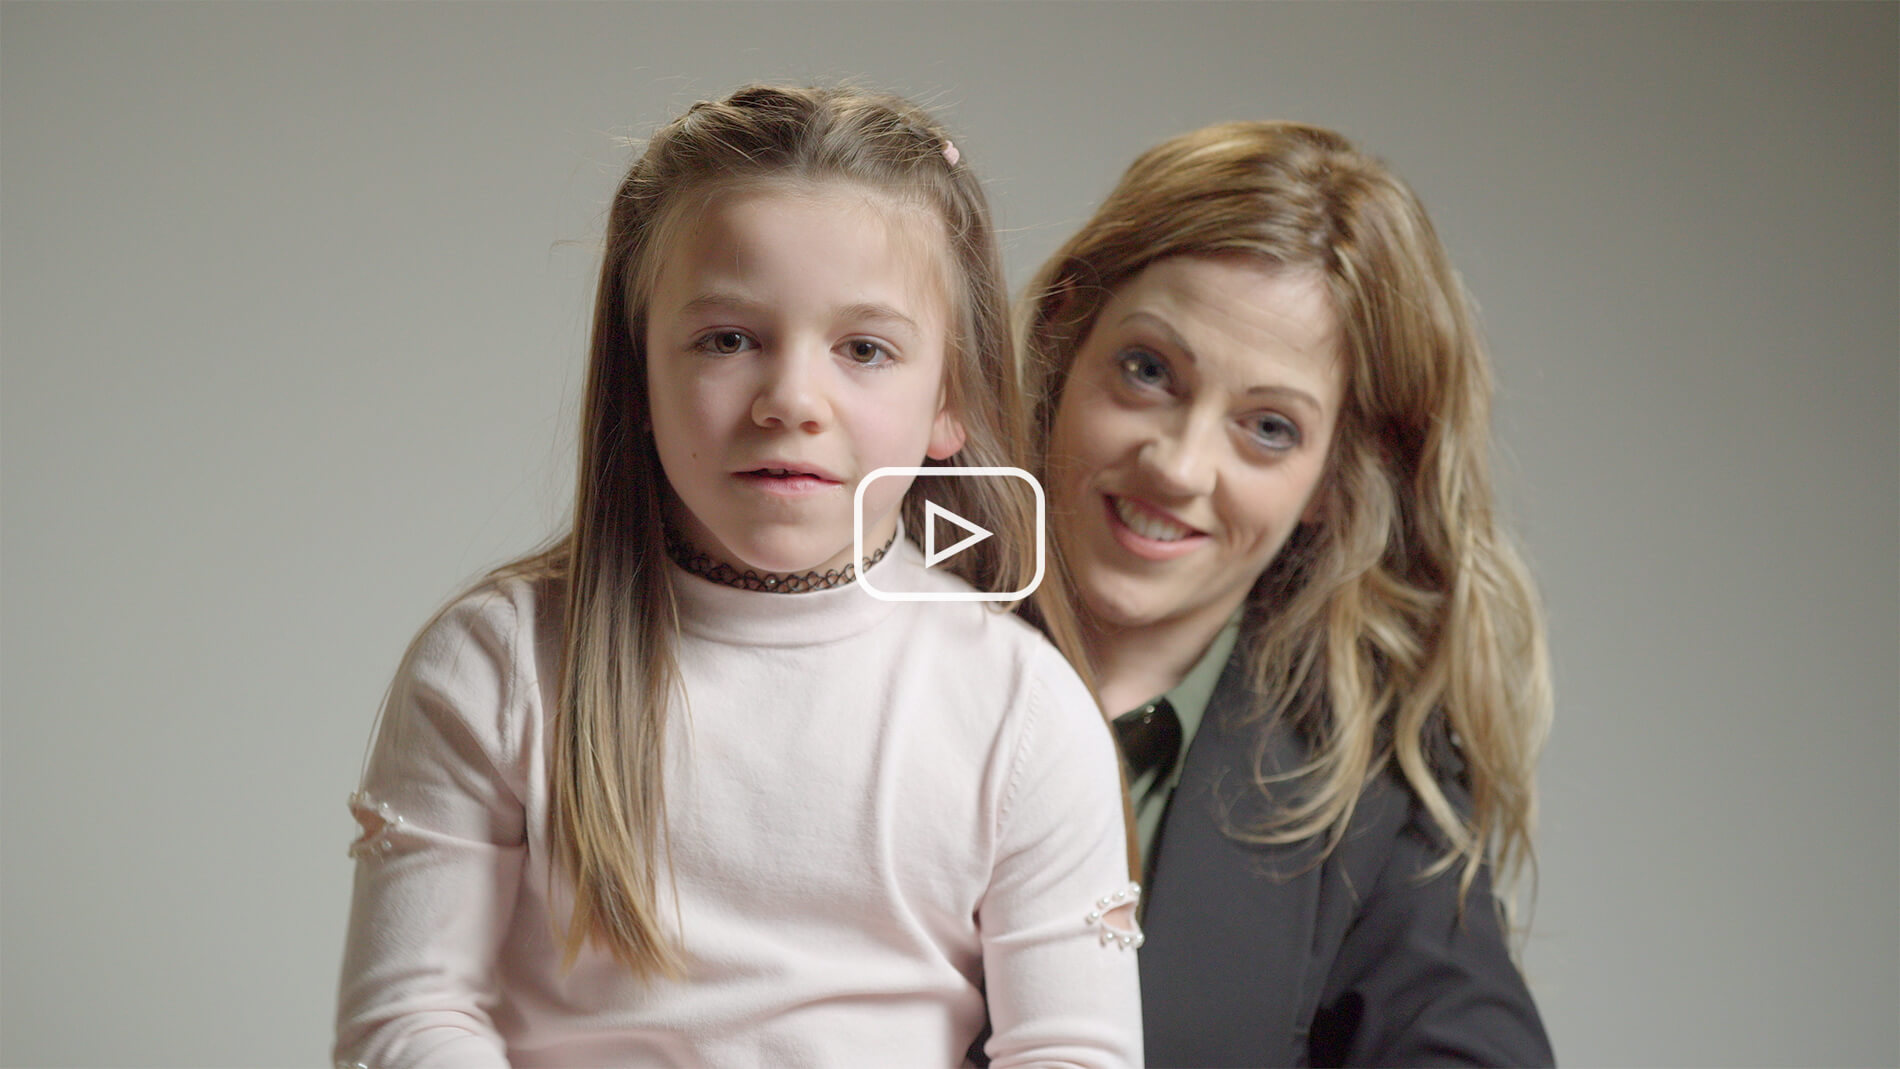 Still image from Turner Syndrome awareness video of Turner Syndrome girl sat on chair looking at camera